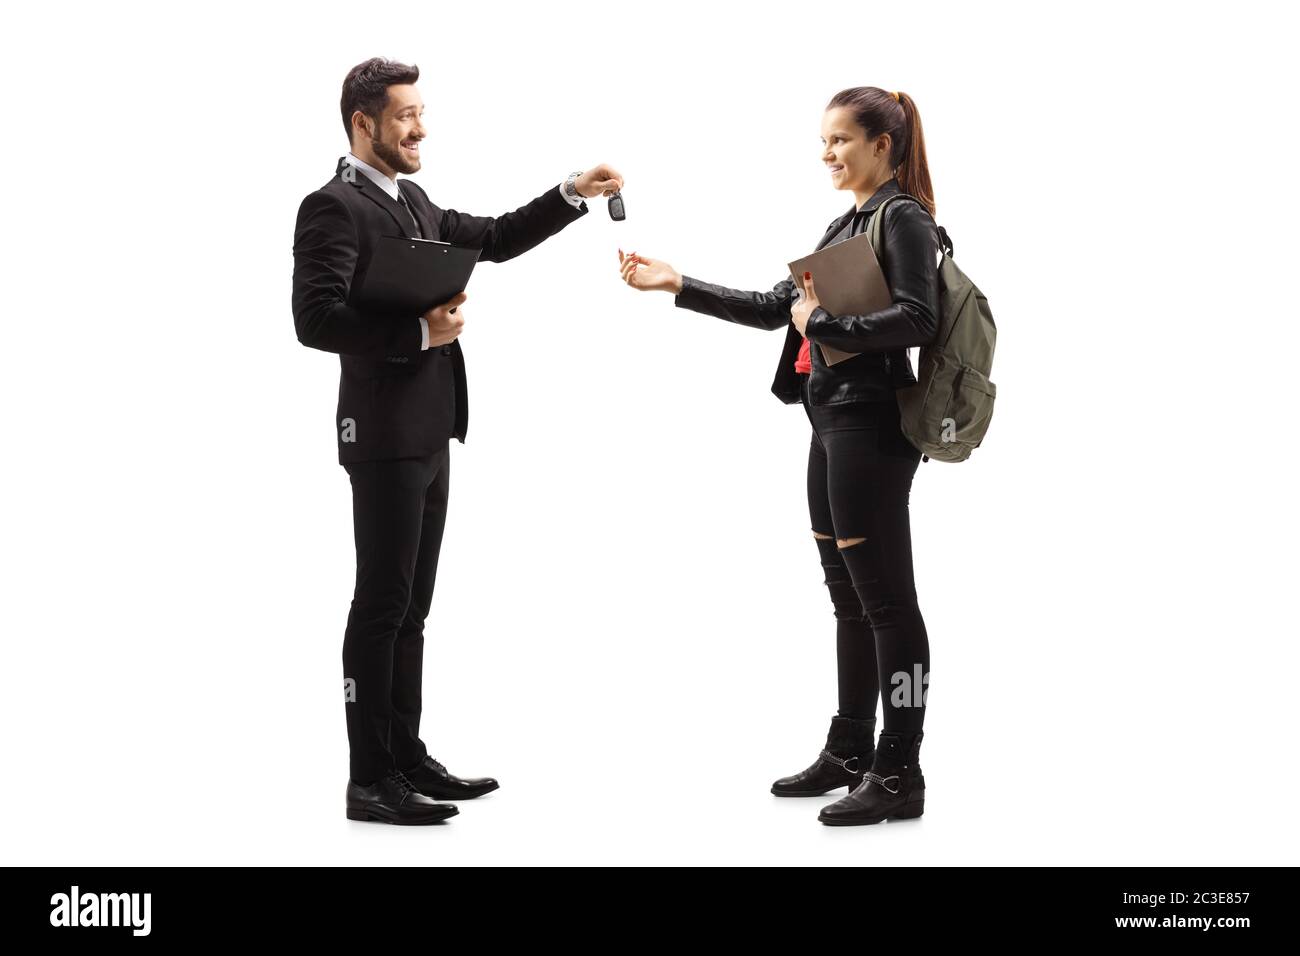 Full length profile shot of a salesman giving car keys to a young female isolated on white background Stock Photo